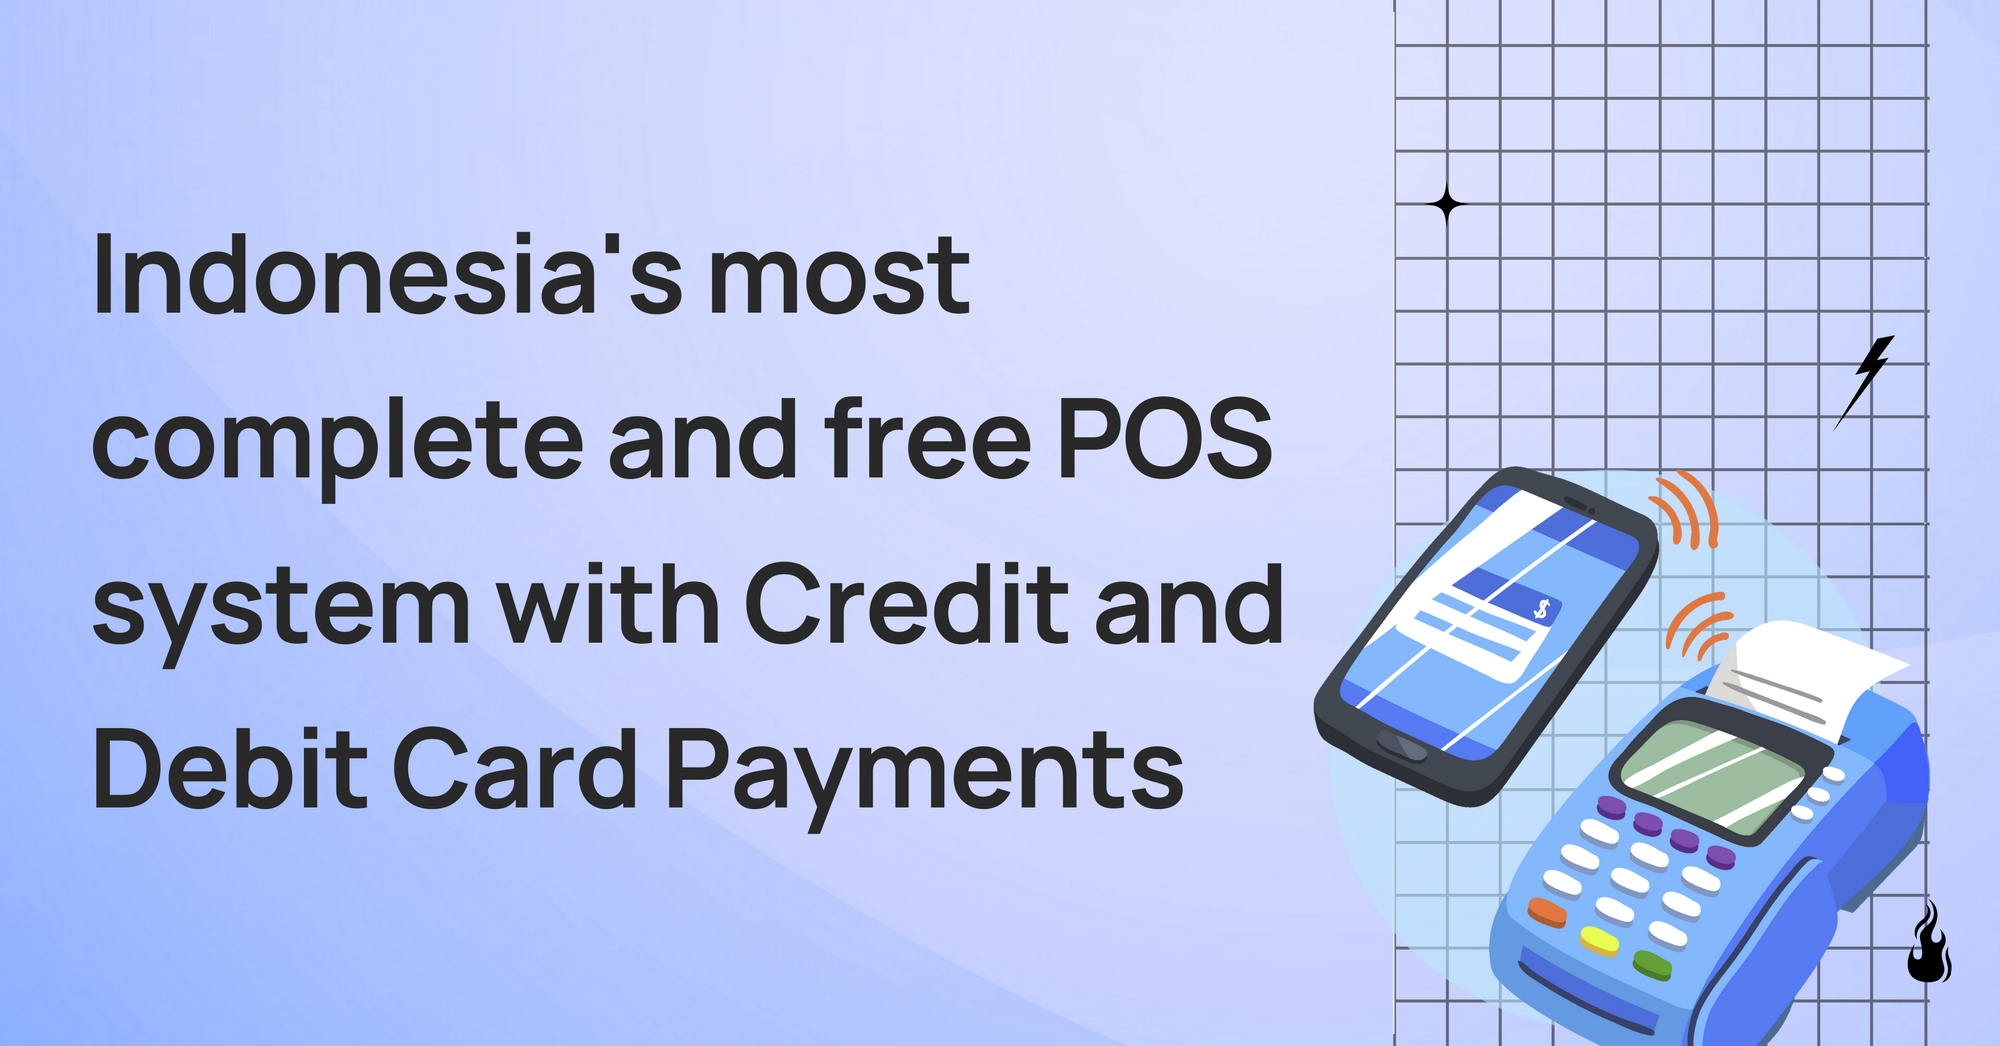 Indonesia's most complete and free POS system with Credit and Debit Card Payments: HitPay